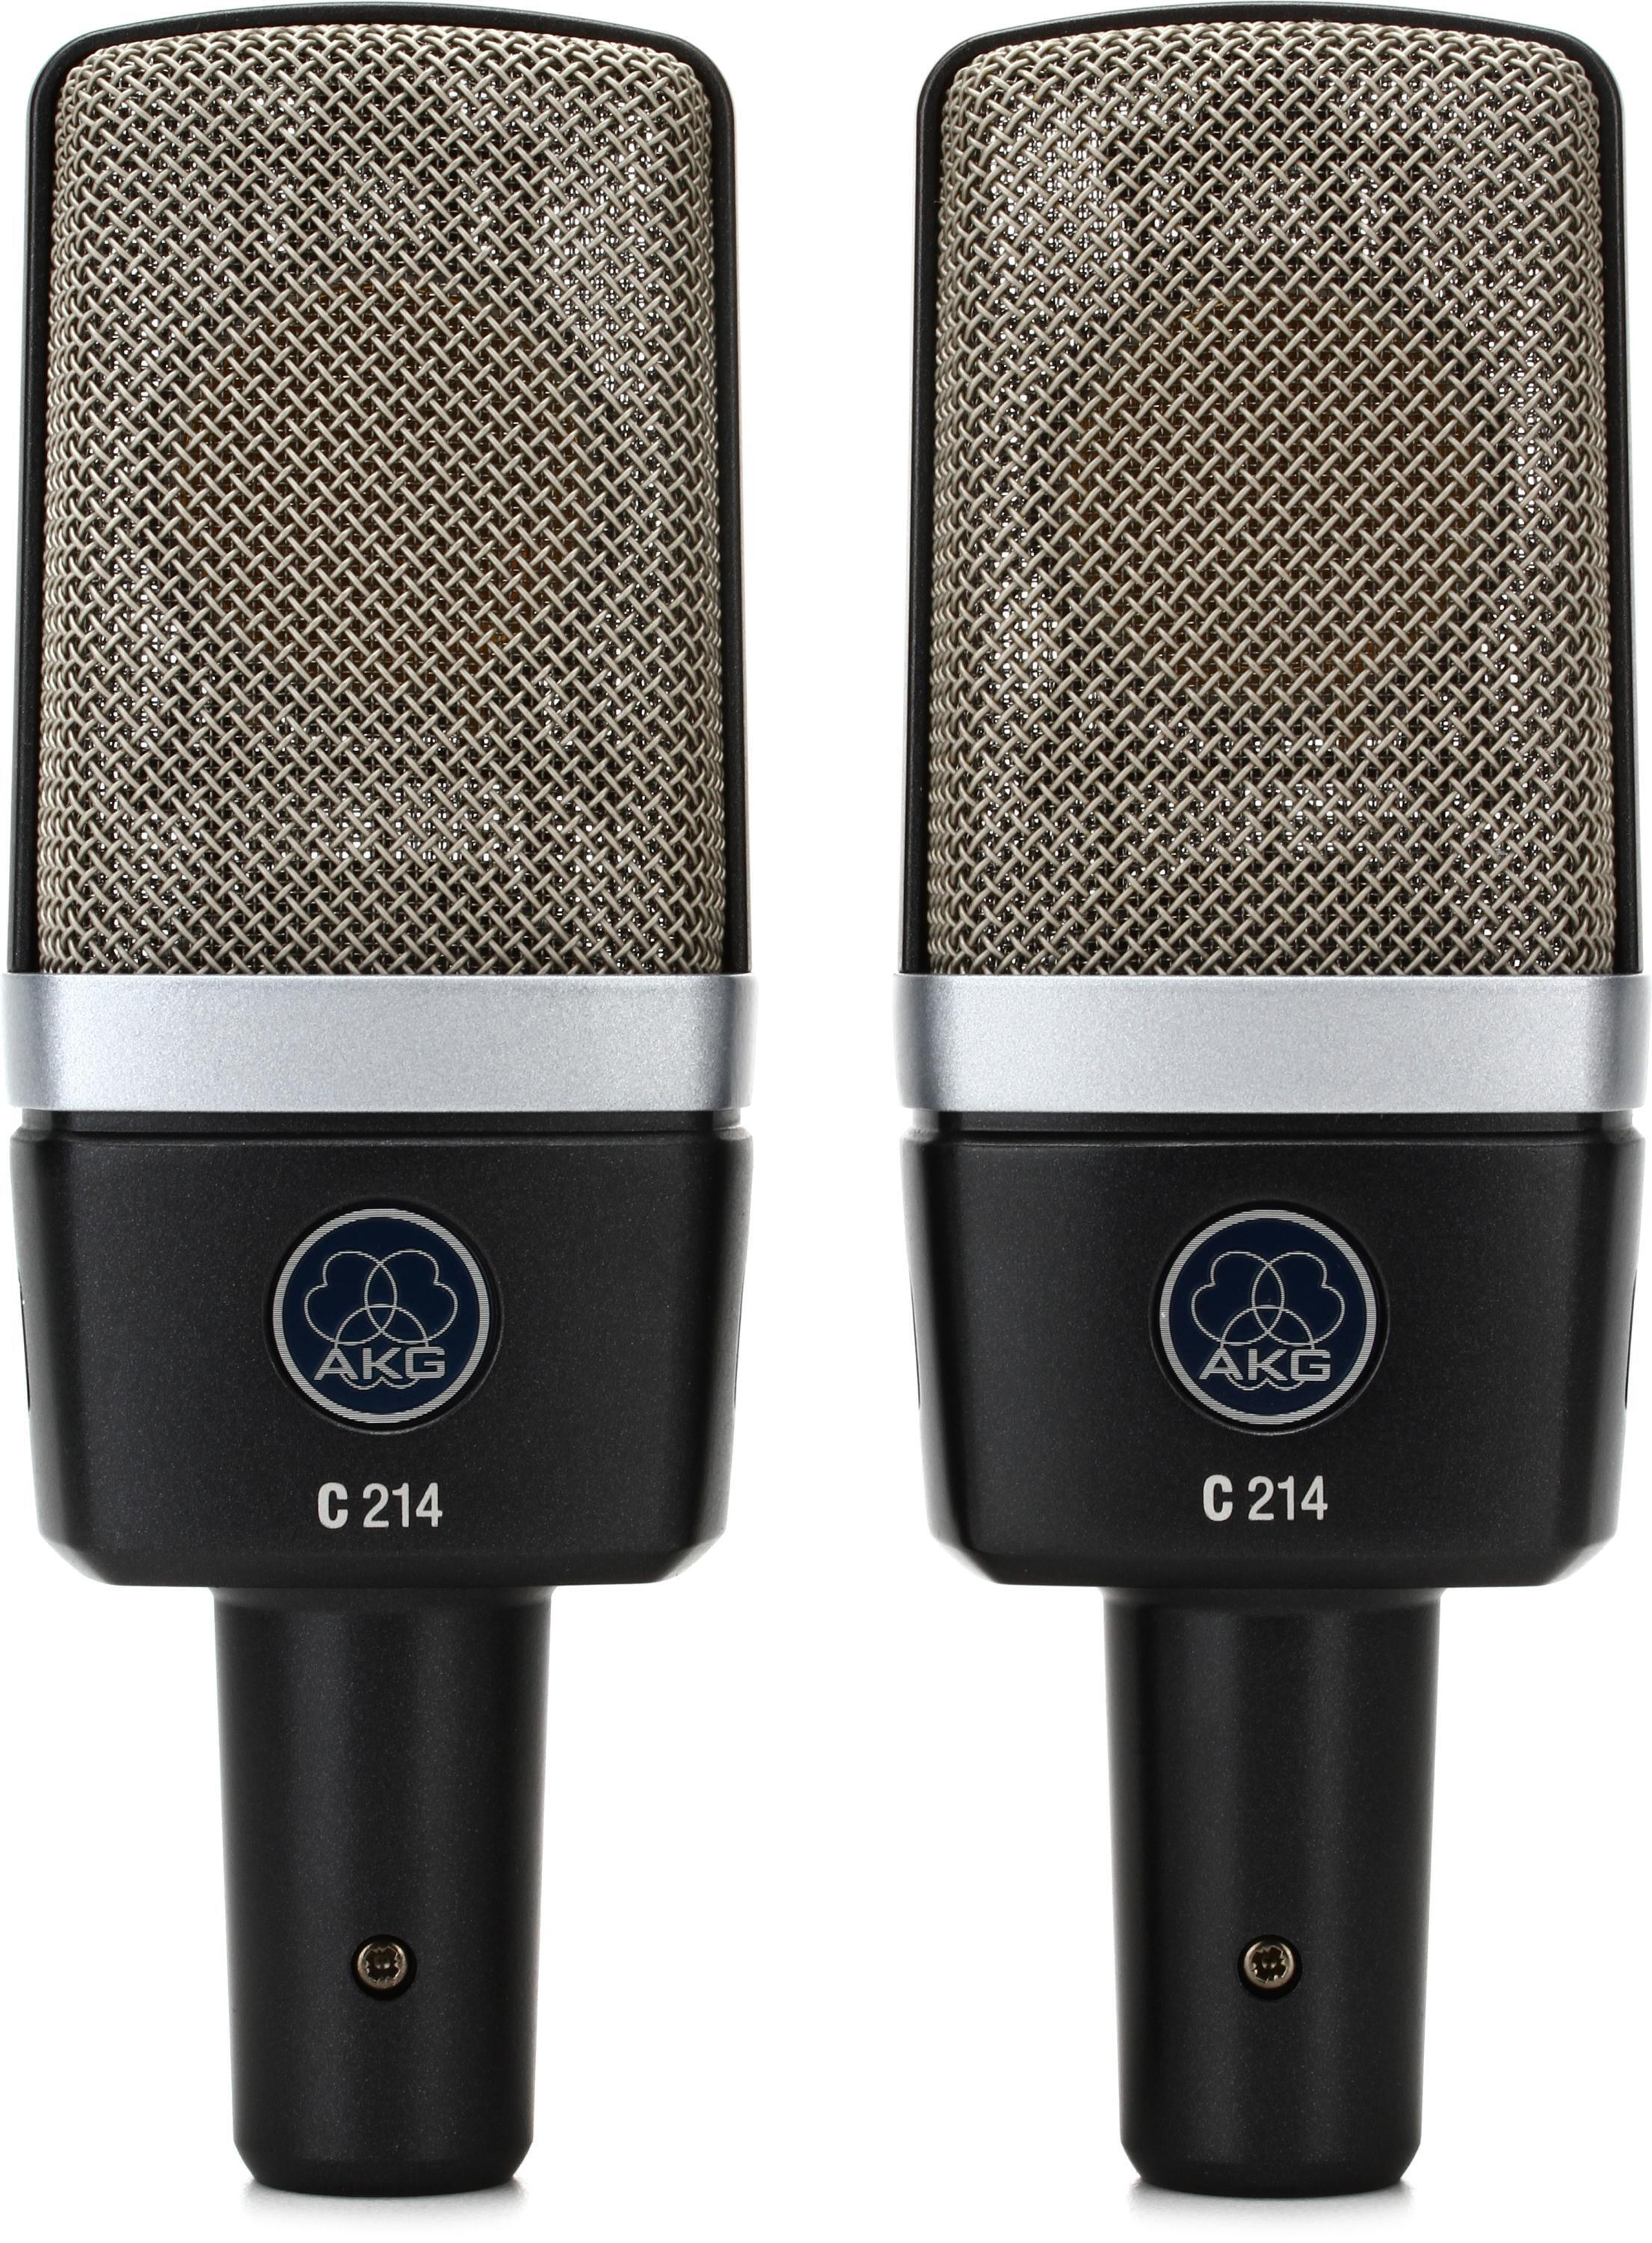 AKG C214 Large-diaphragm Condenser Microphone - Matched Stereo Pair